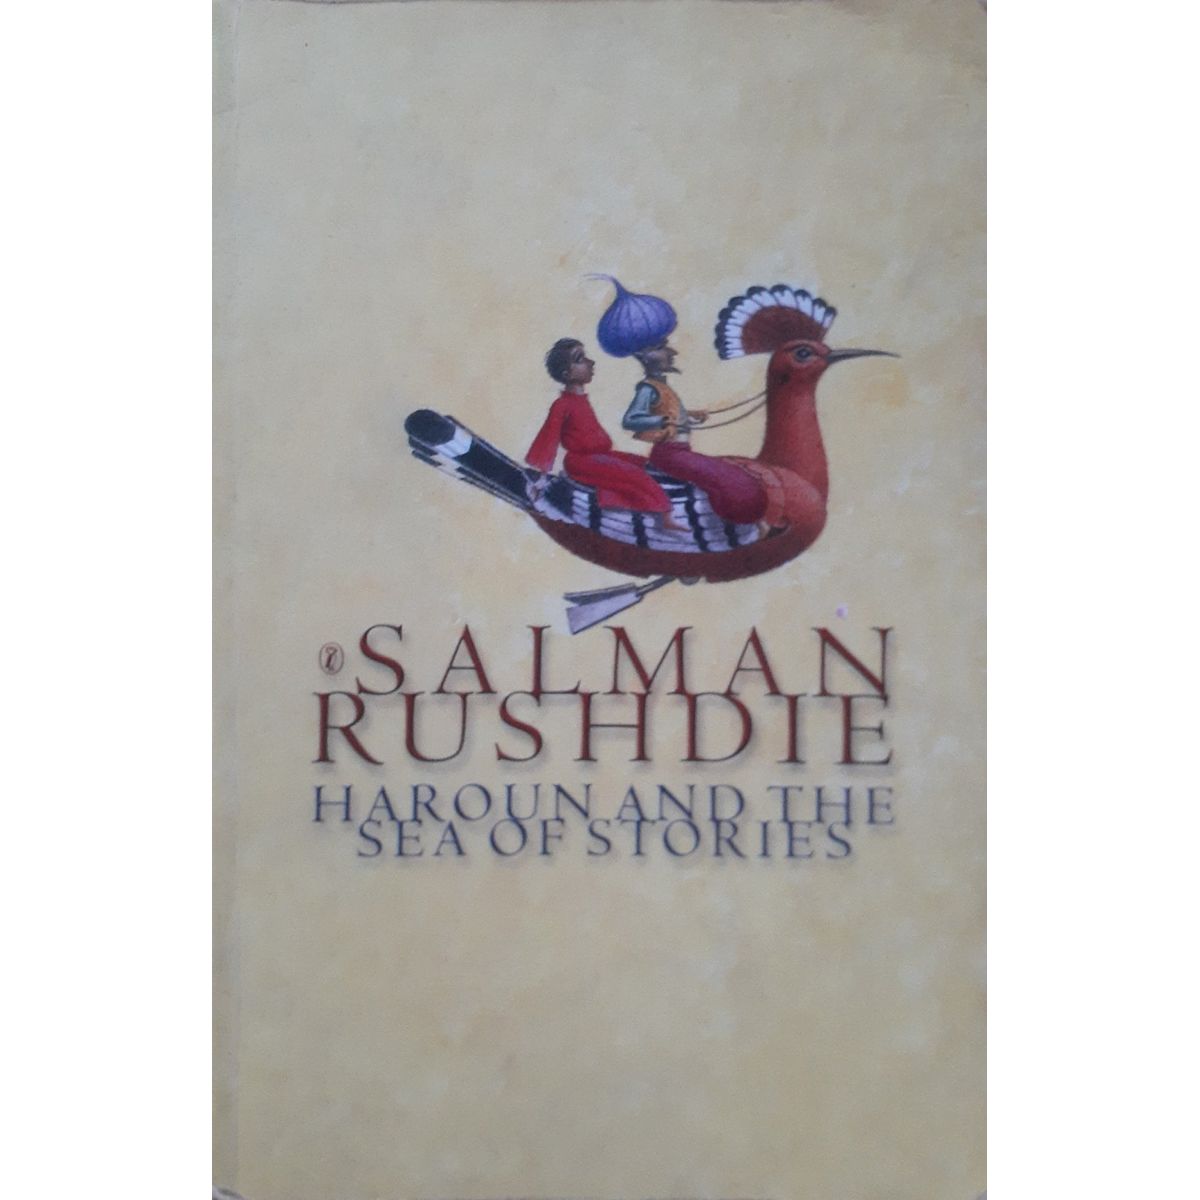 ISBN: 9780140366501 / 0140366504 - Haroun and the Sea of Stories by Salman Rushdie [1993]